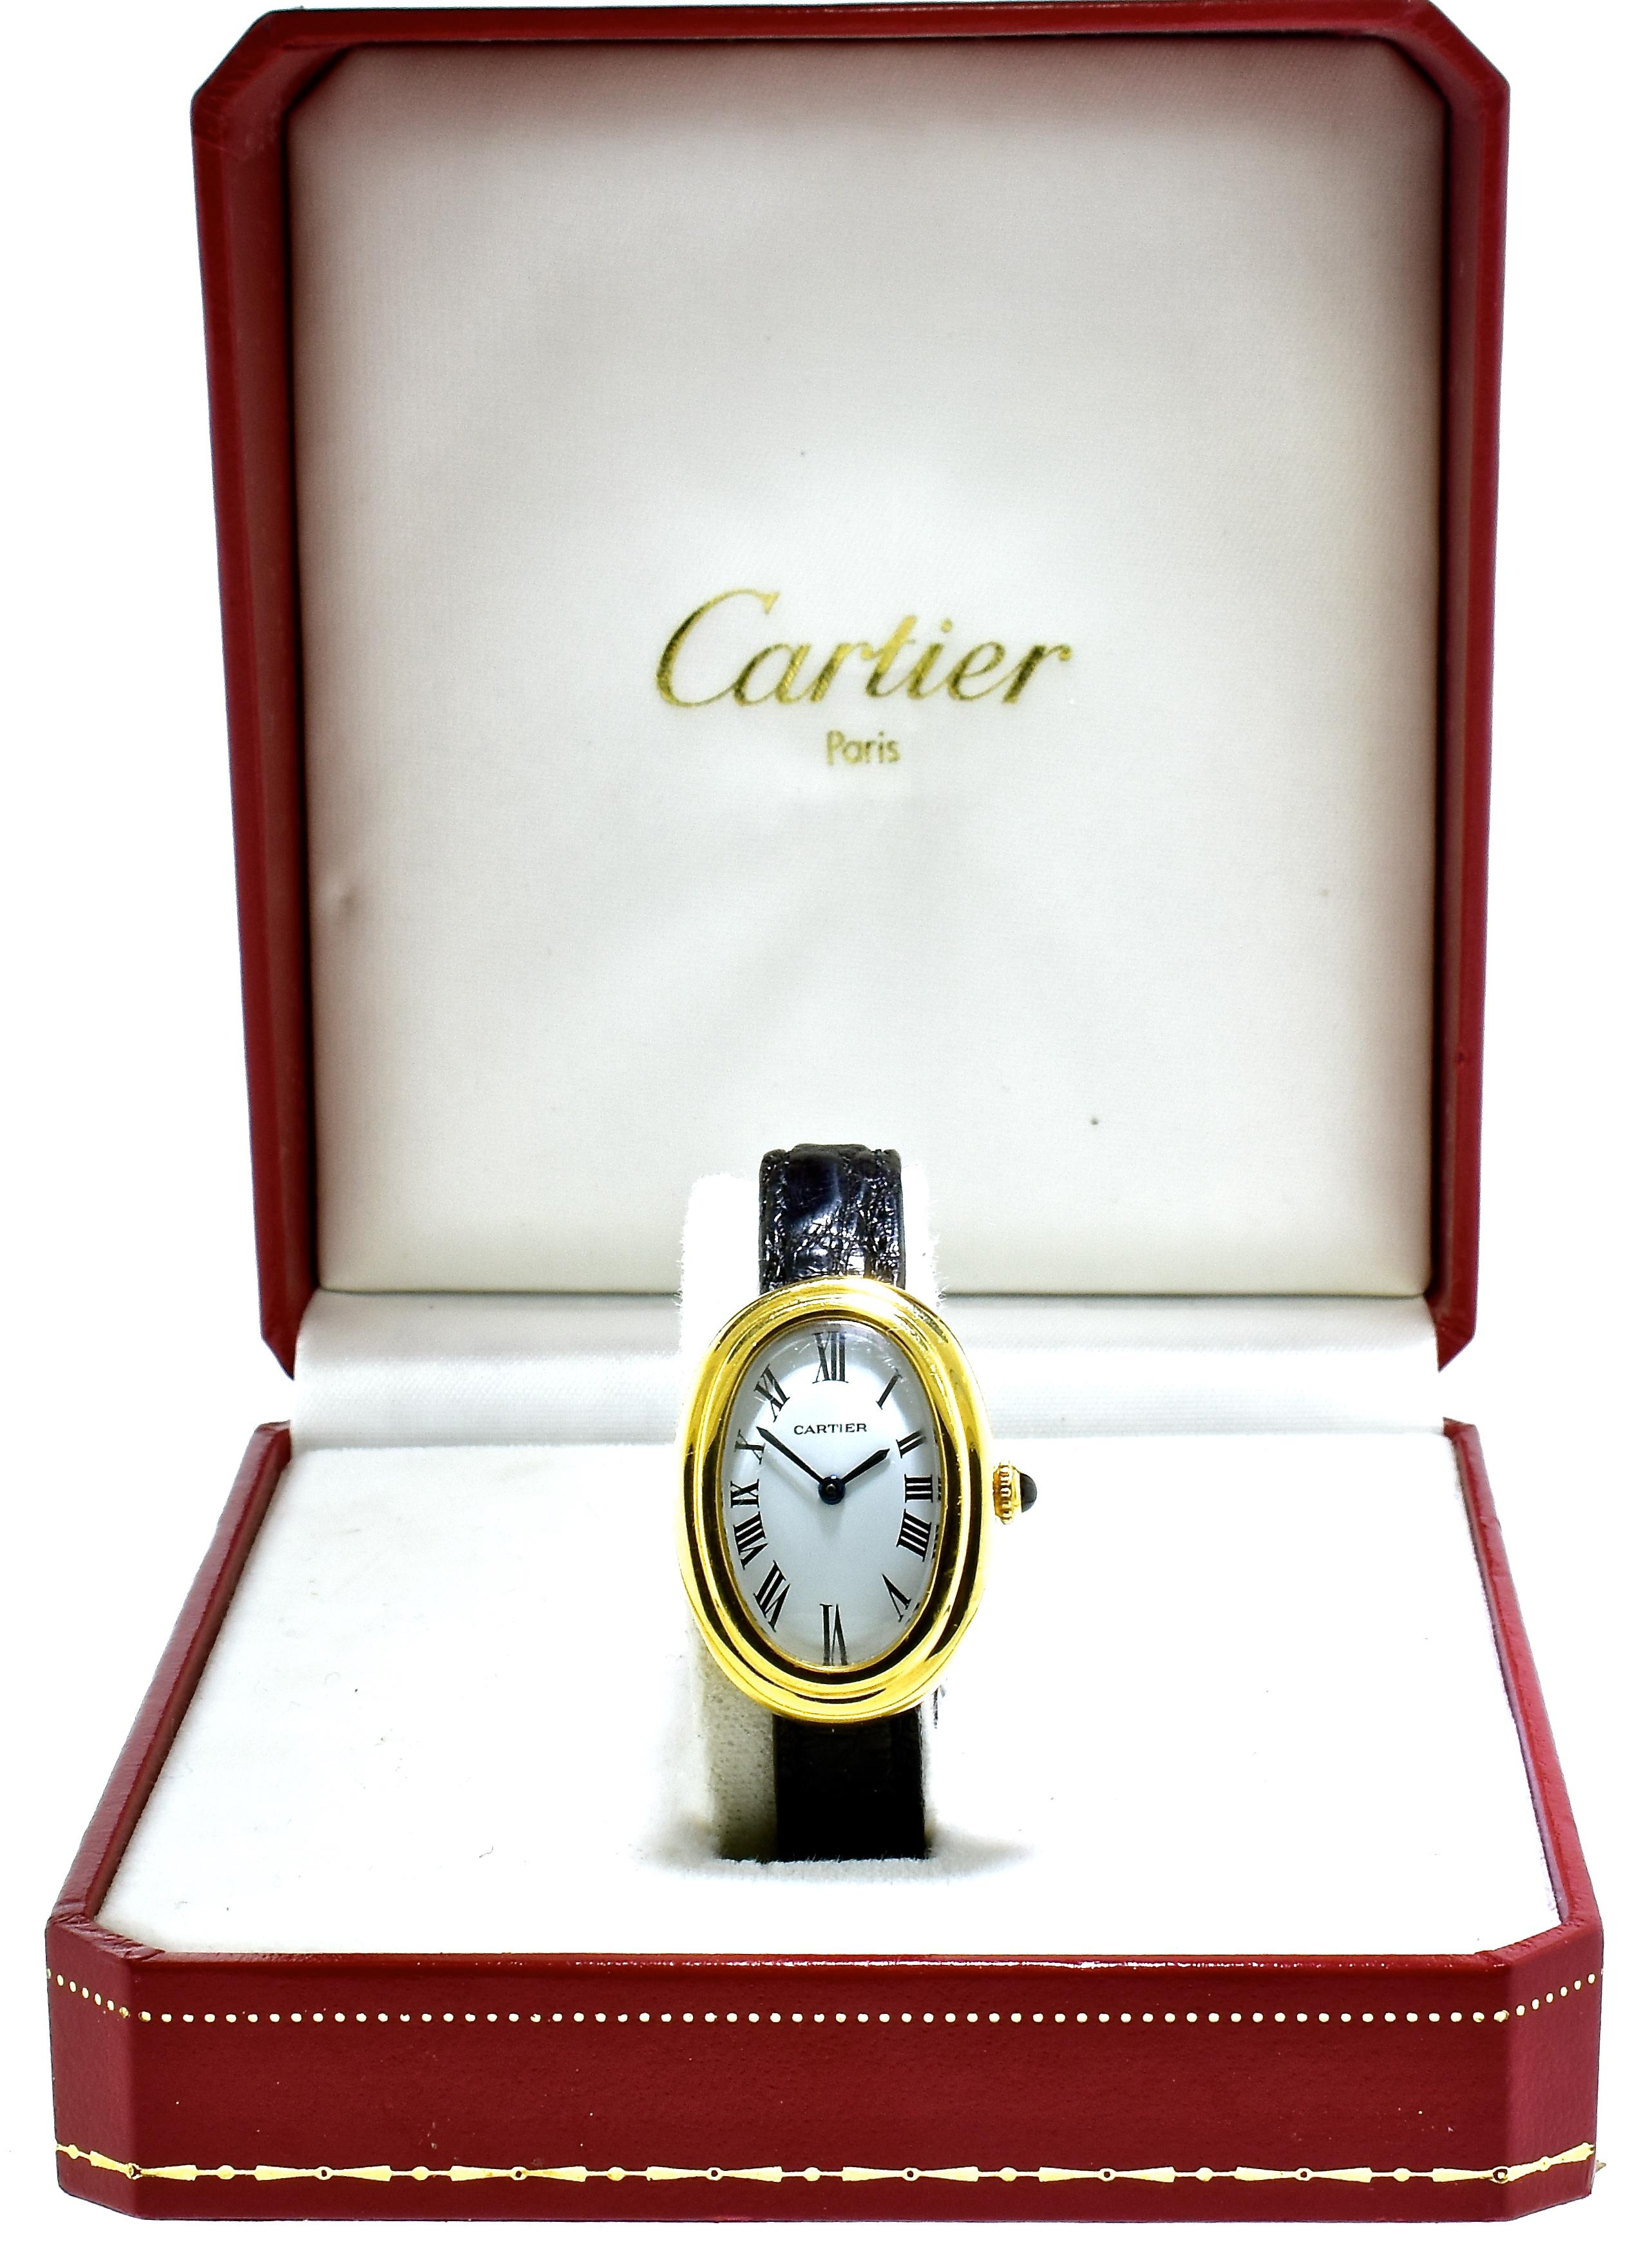 Cartier Baignoire 18K vintage 18K yellow gold wristwatch with reference no. 780941795,. the dimensions are: 23x32mm, this fine watch is a manual wind movement, with a white dial and the black hands are Roman numerals.  The Cartier strap has slight